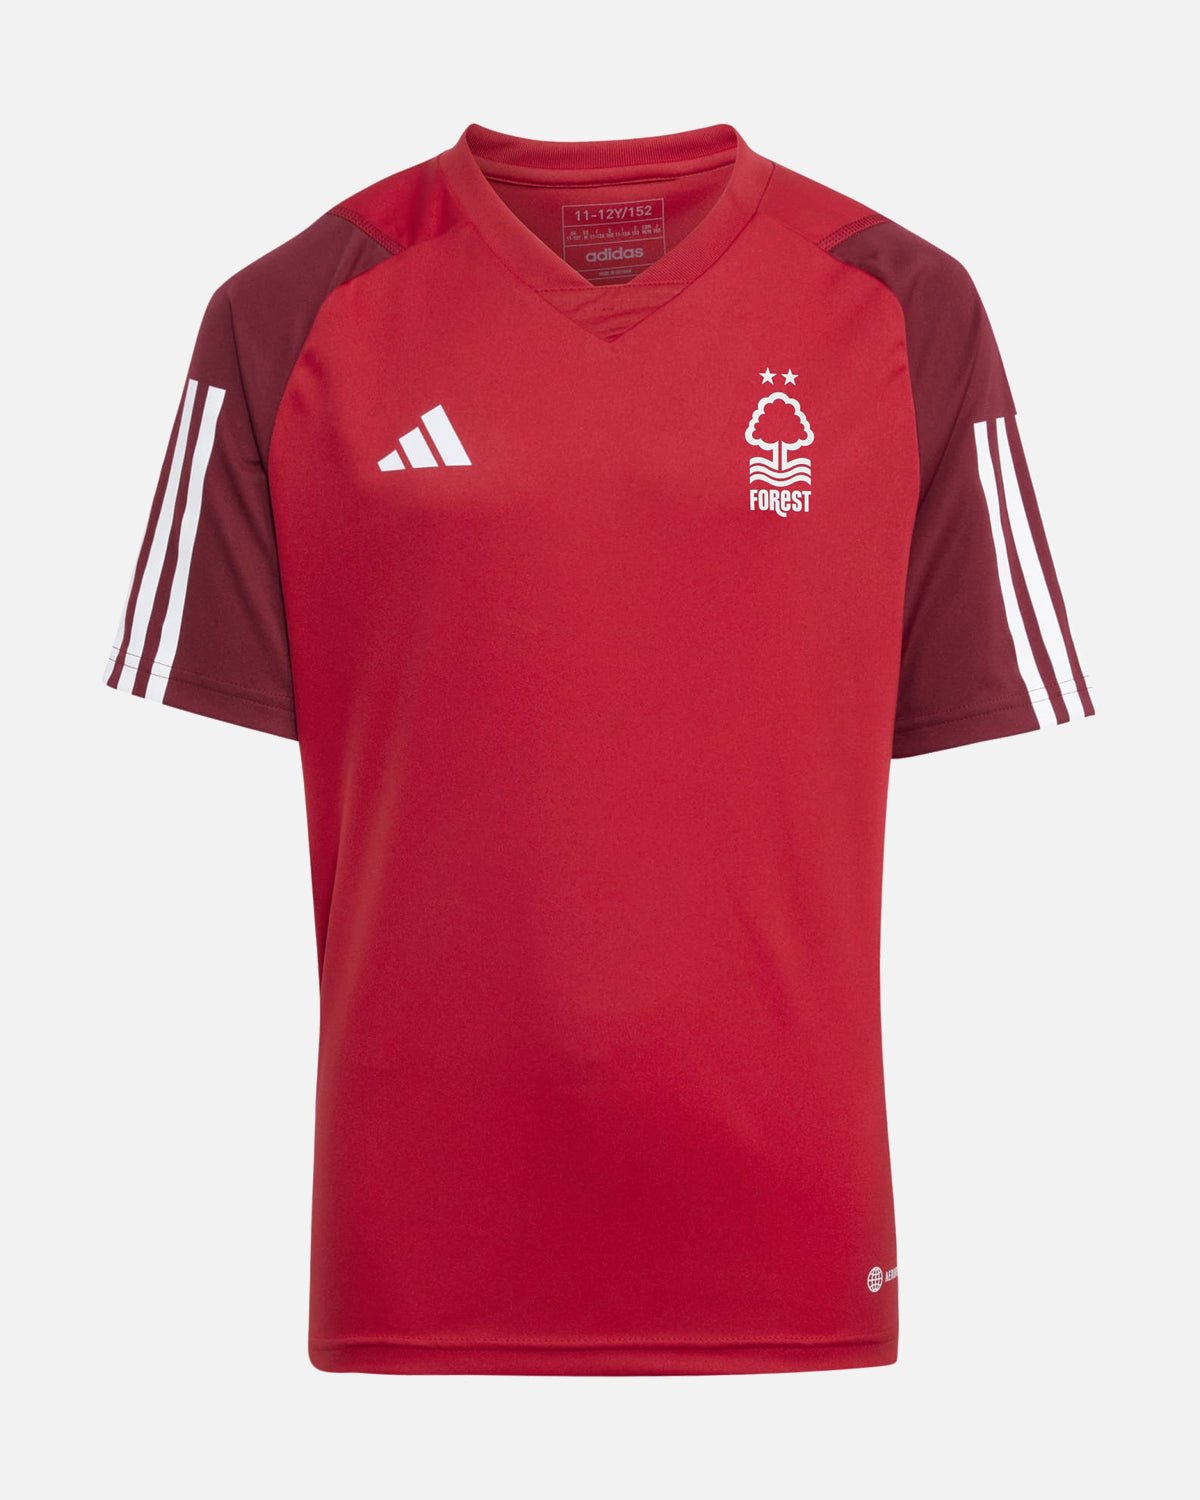 NFFC Junior Red Training Jersey 23-24 - Nottingham Forest FC